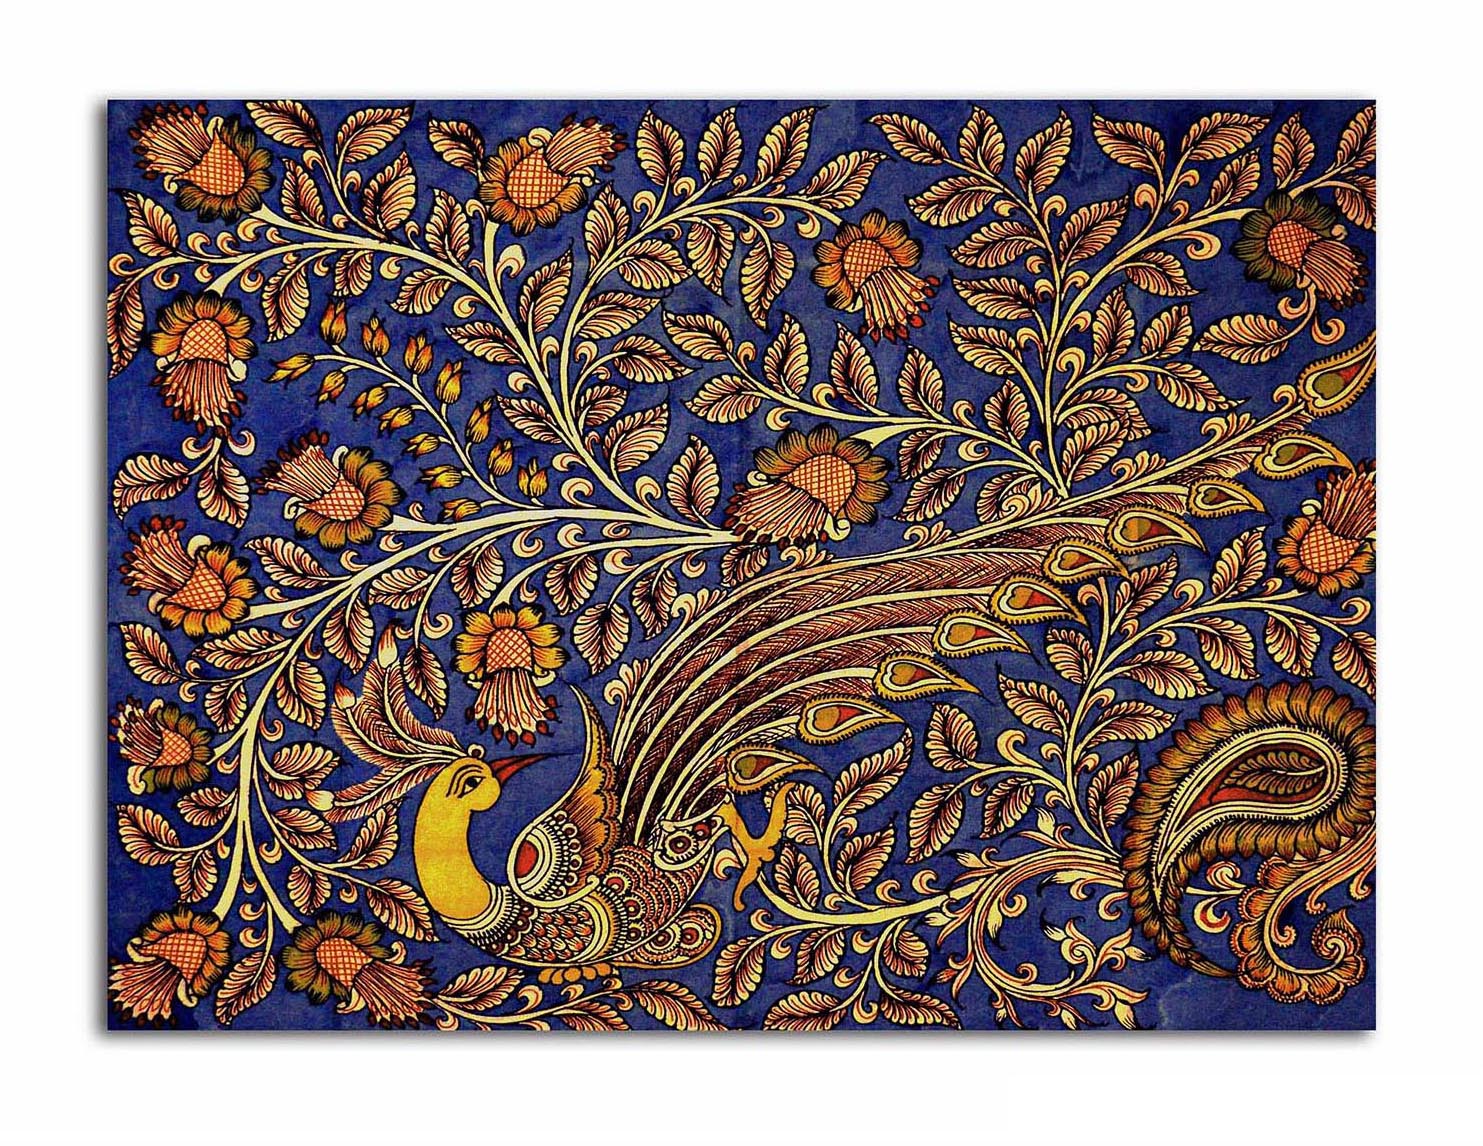 The Golden Peacock  - Canvas Painting - Unframed